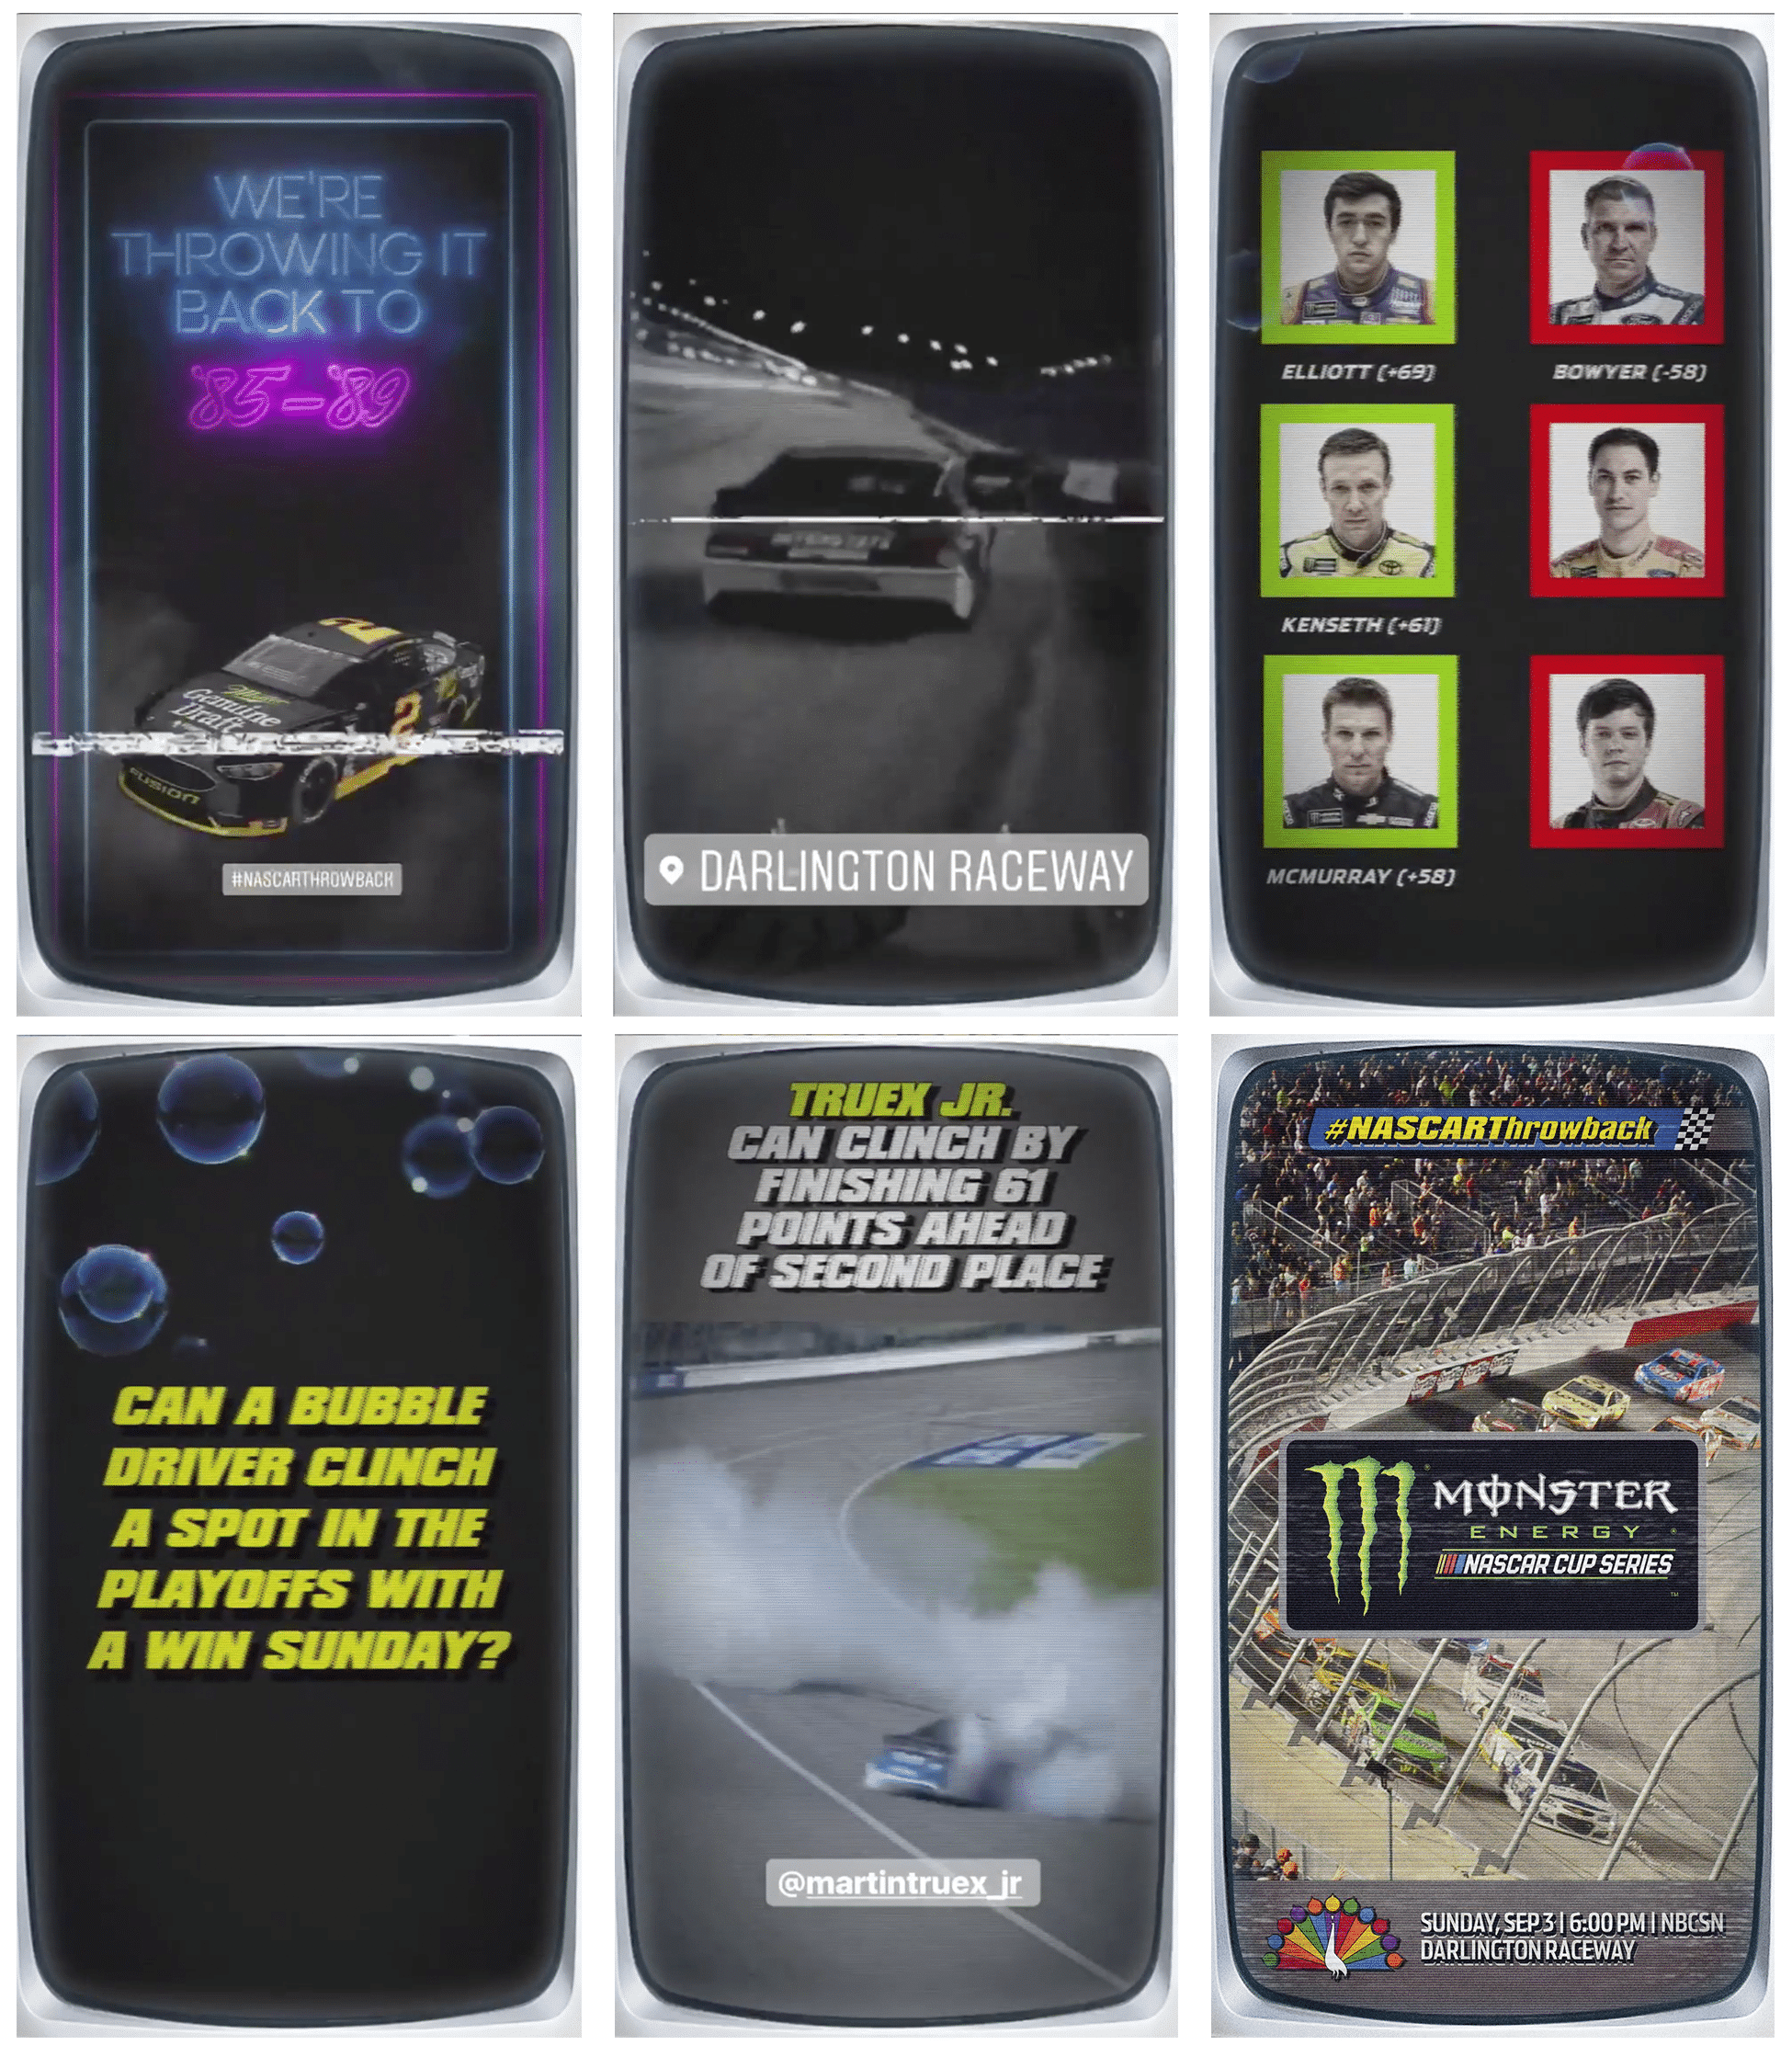 Compile IG Stories Snapchat of NASCAR Throwback using IG static-ridden old TV, Retro Graphics and All of The Throwback Paint Schemes